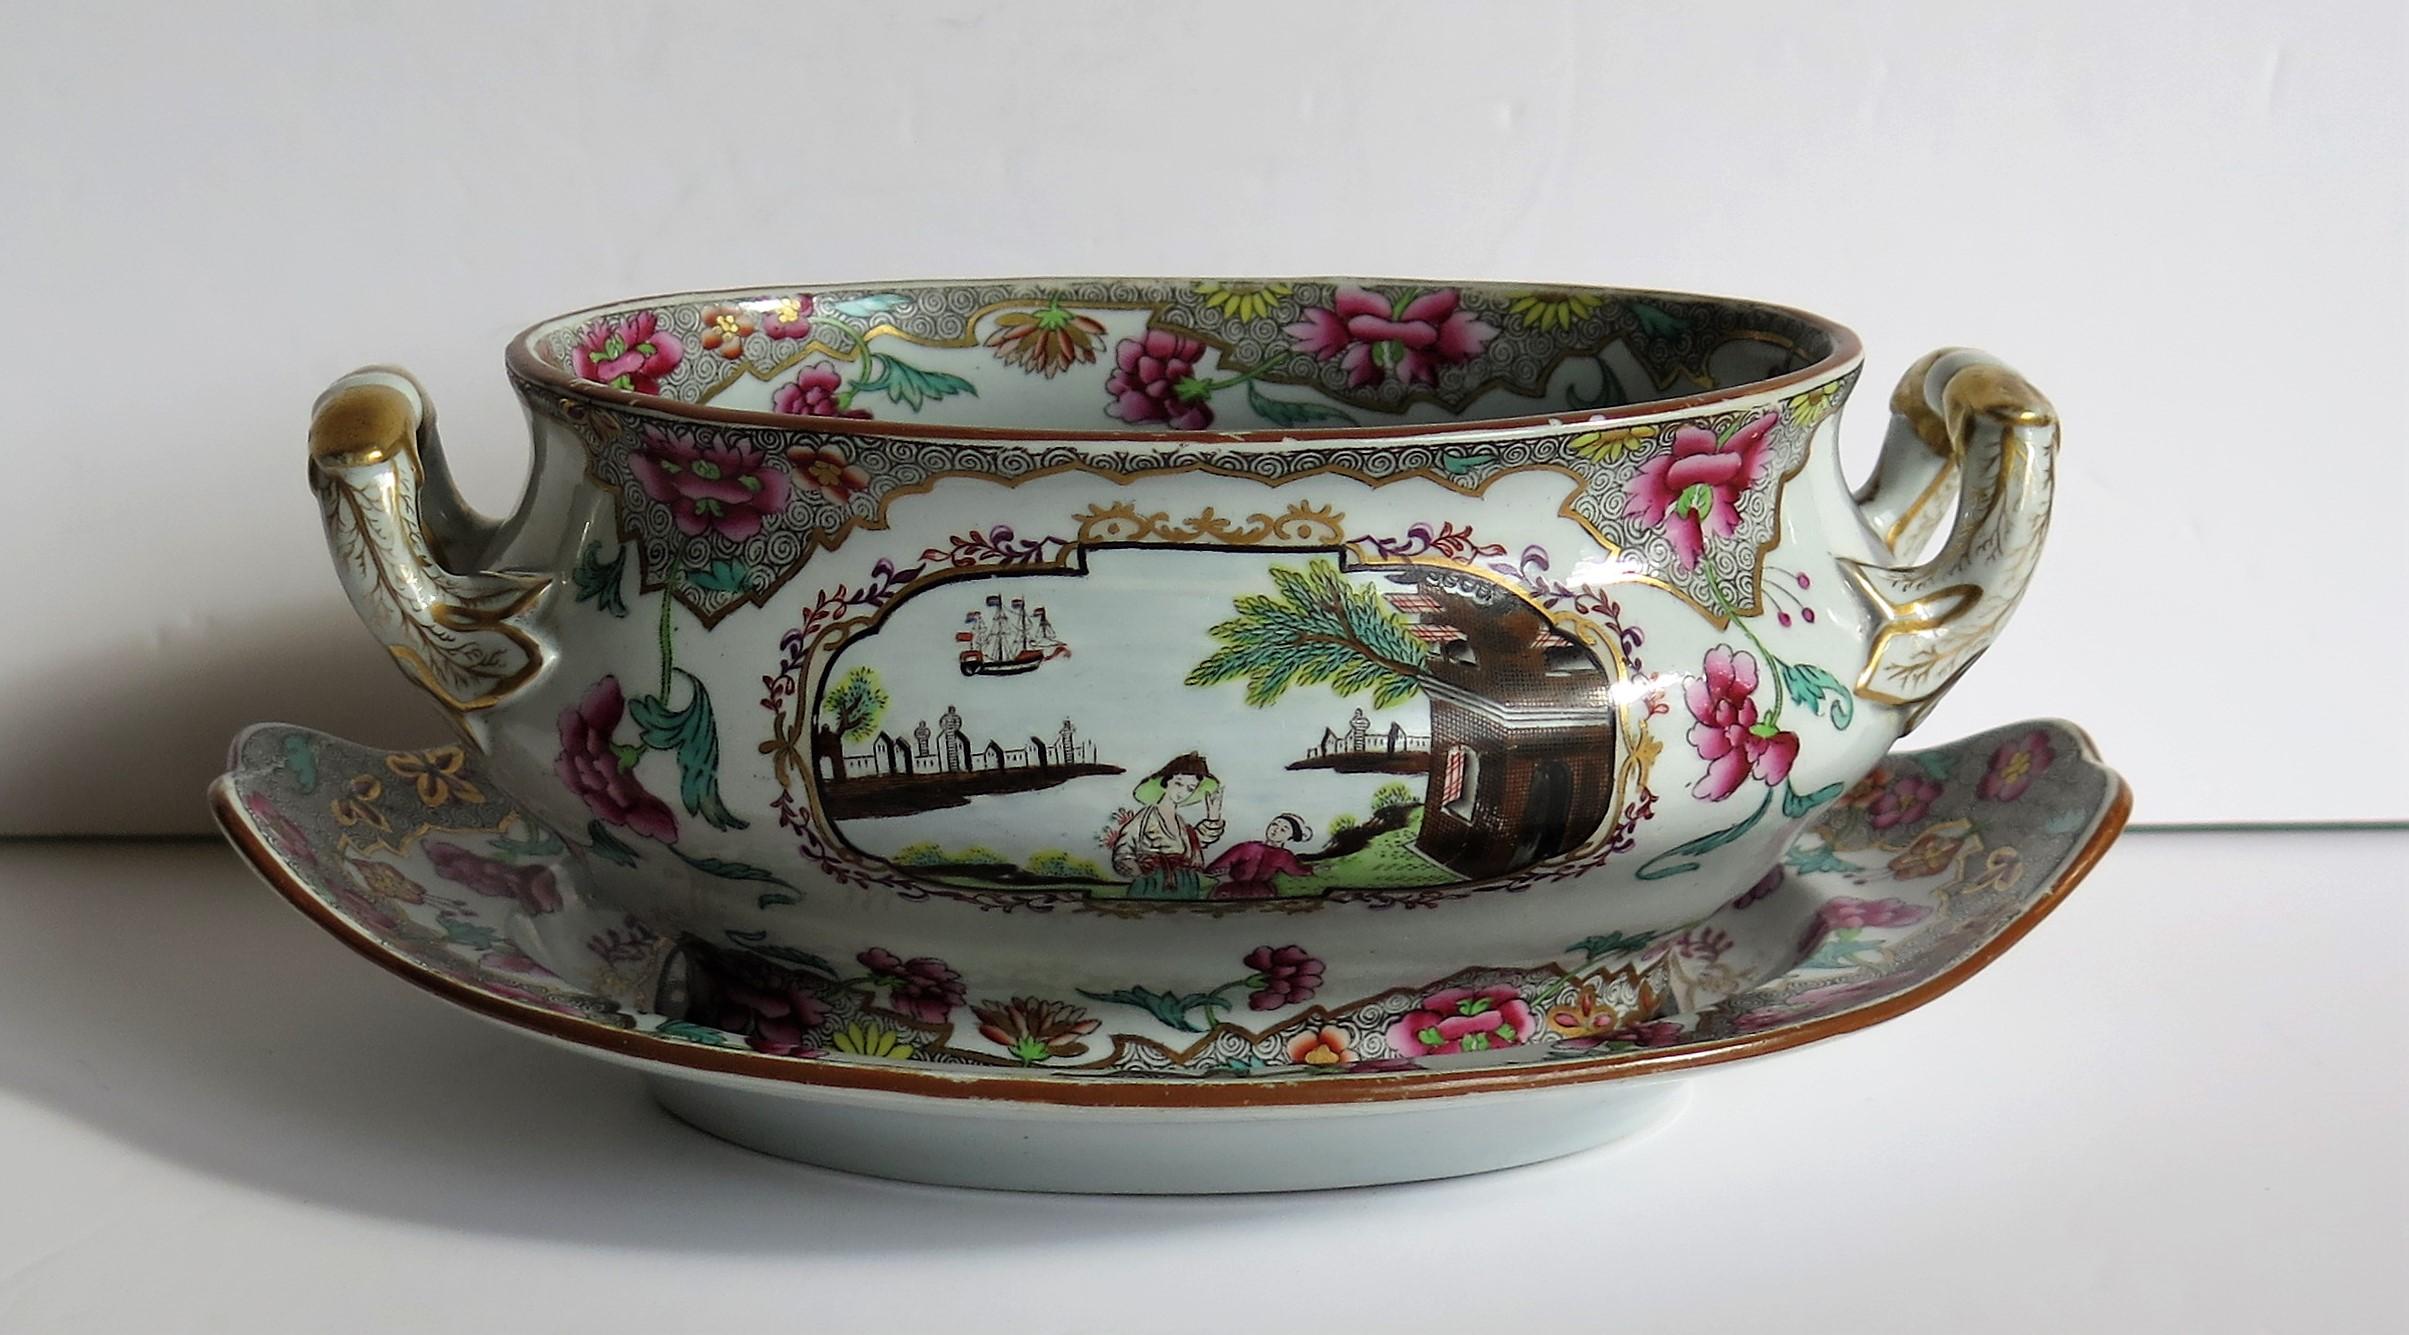 Chinoiserie Spode Stone China Sauce Tureen & Stand in Ship Pattern 3067, circa 1810